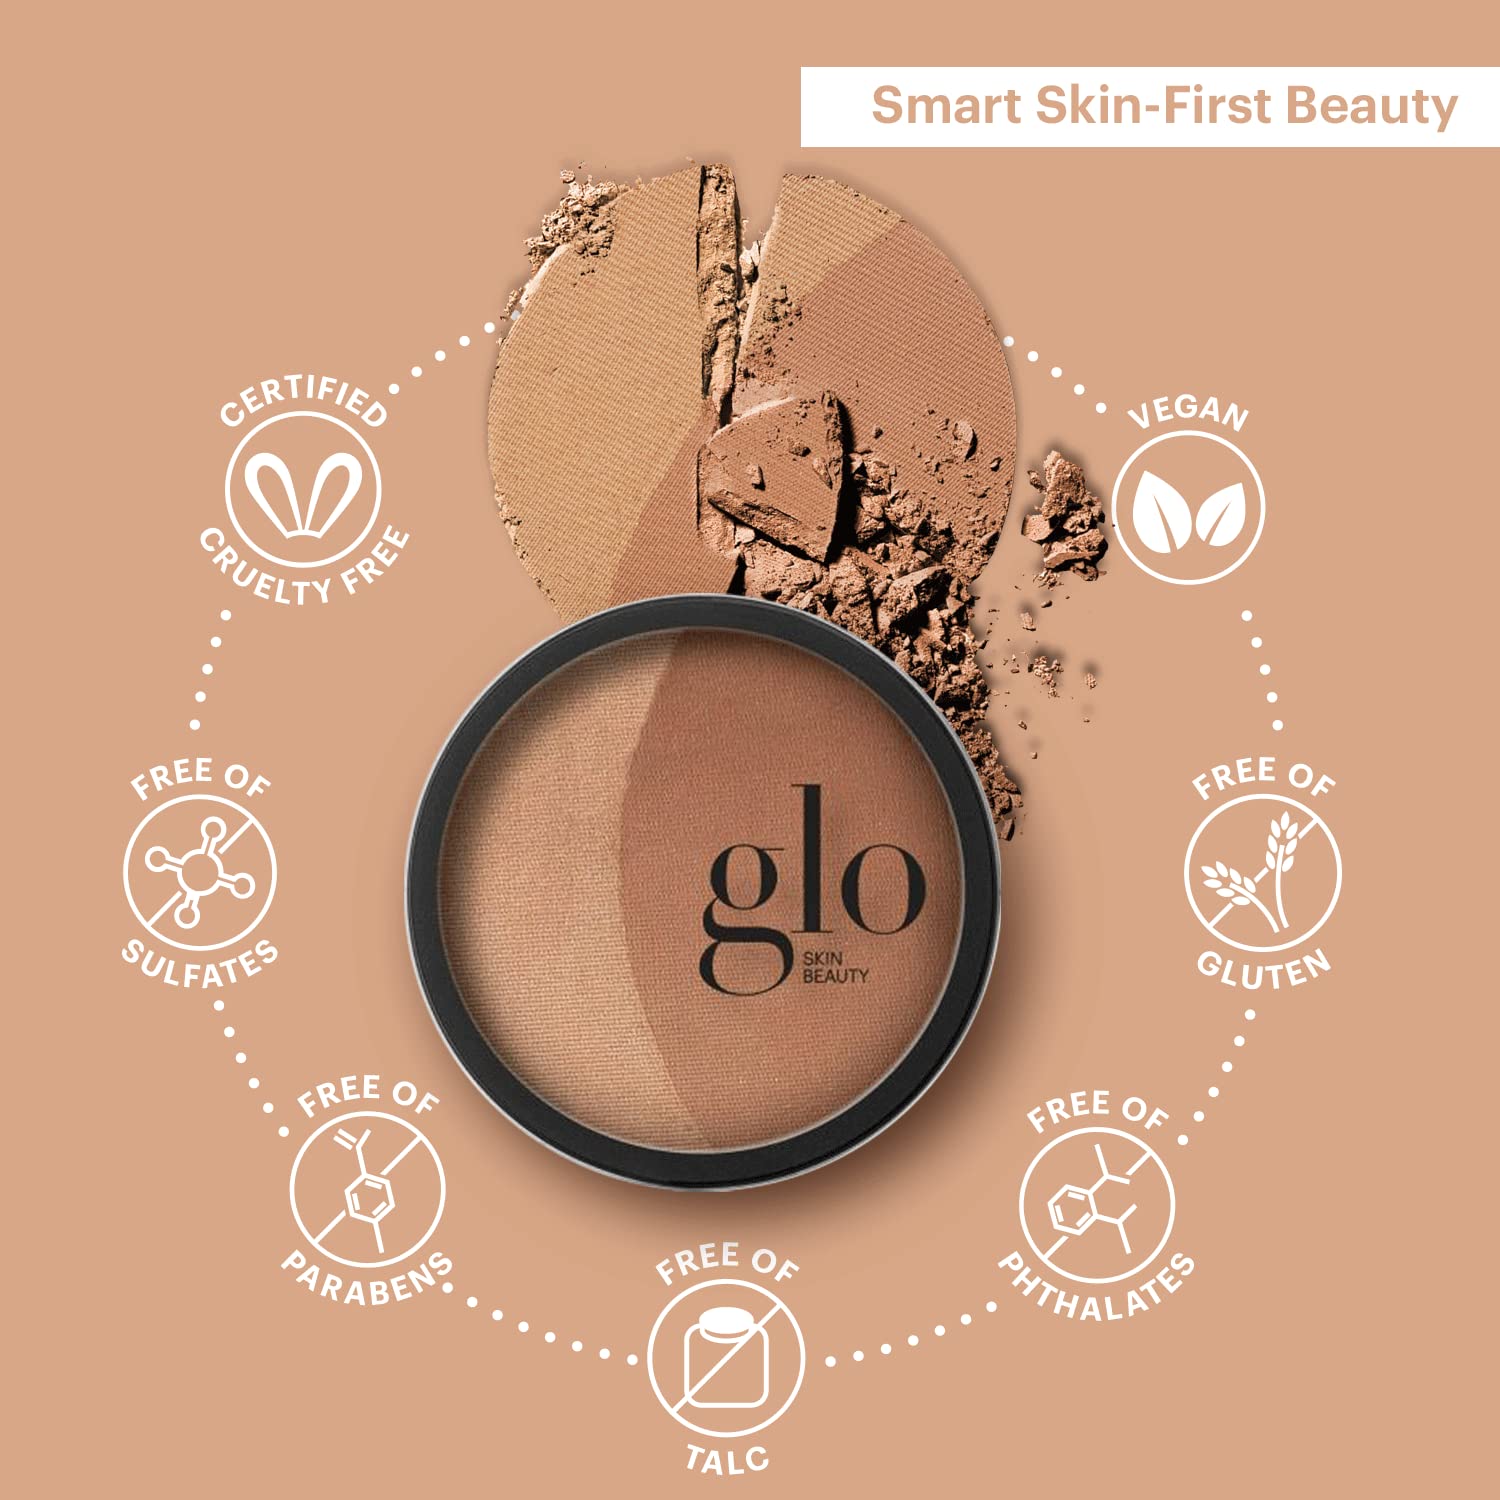 Glo Skin Beauty Bronzer Pressed Powder (Sunkiss) - Mineral Based Makeup Adds Warmth and Natural Contour for a Sun-Kissed Glow